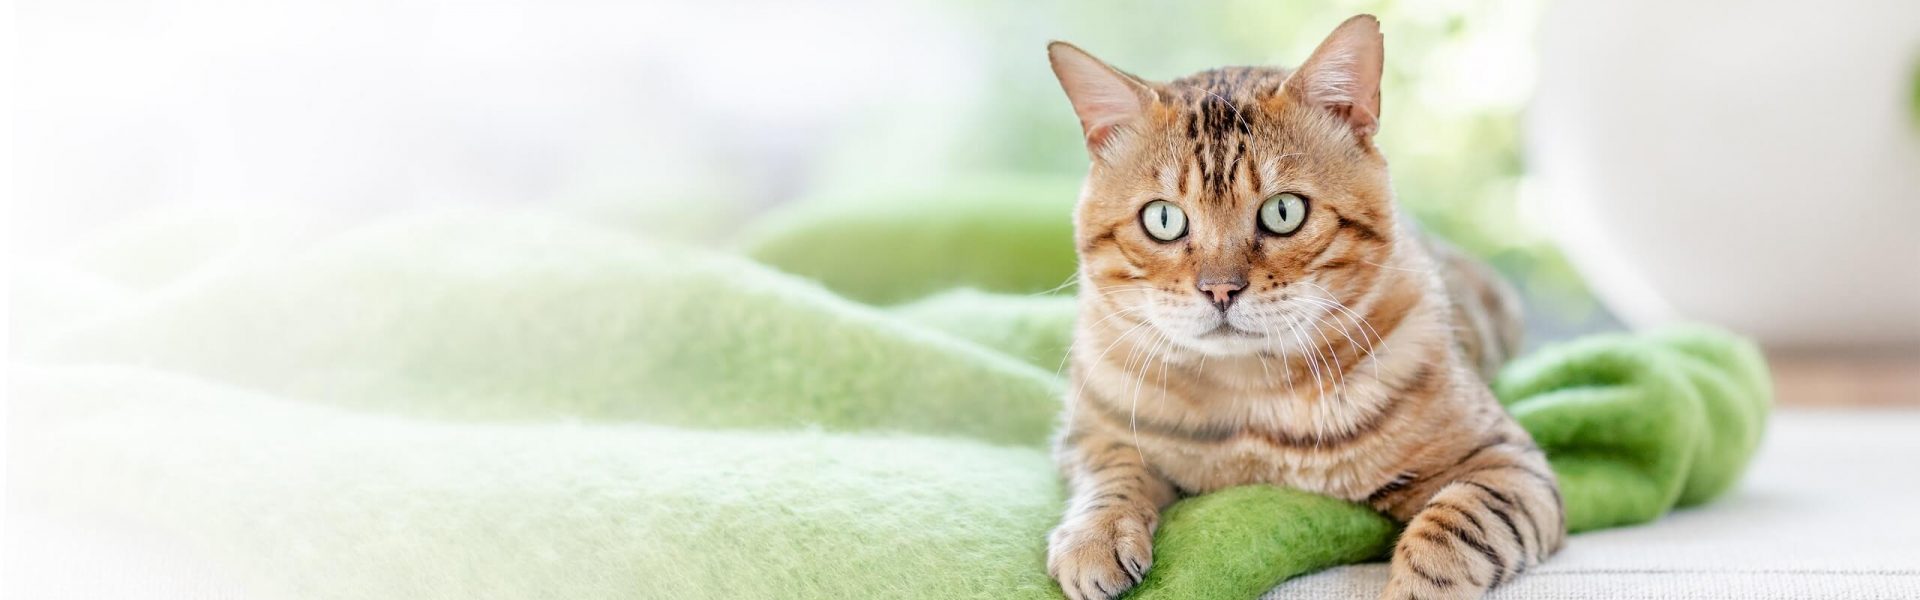 Cat's Best, the first cat litter that combines nature and high